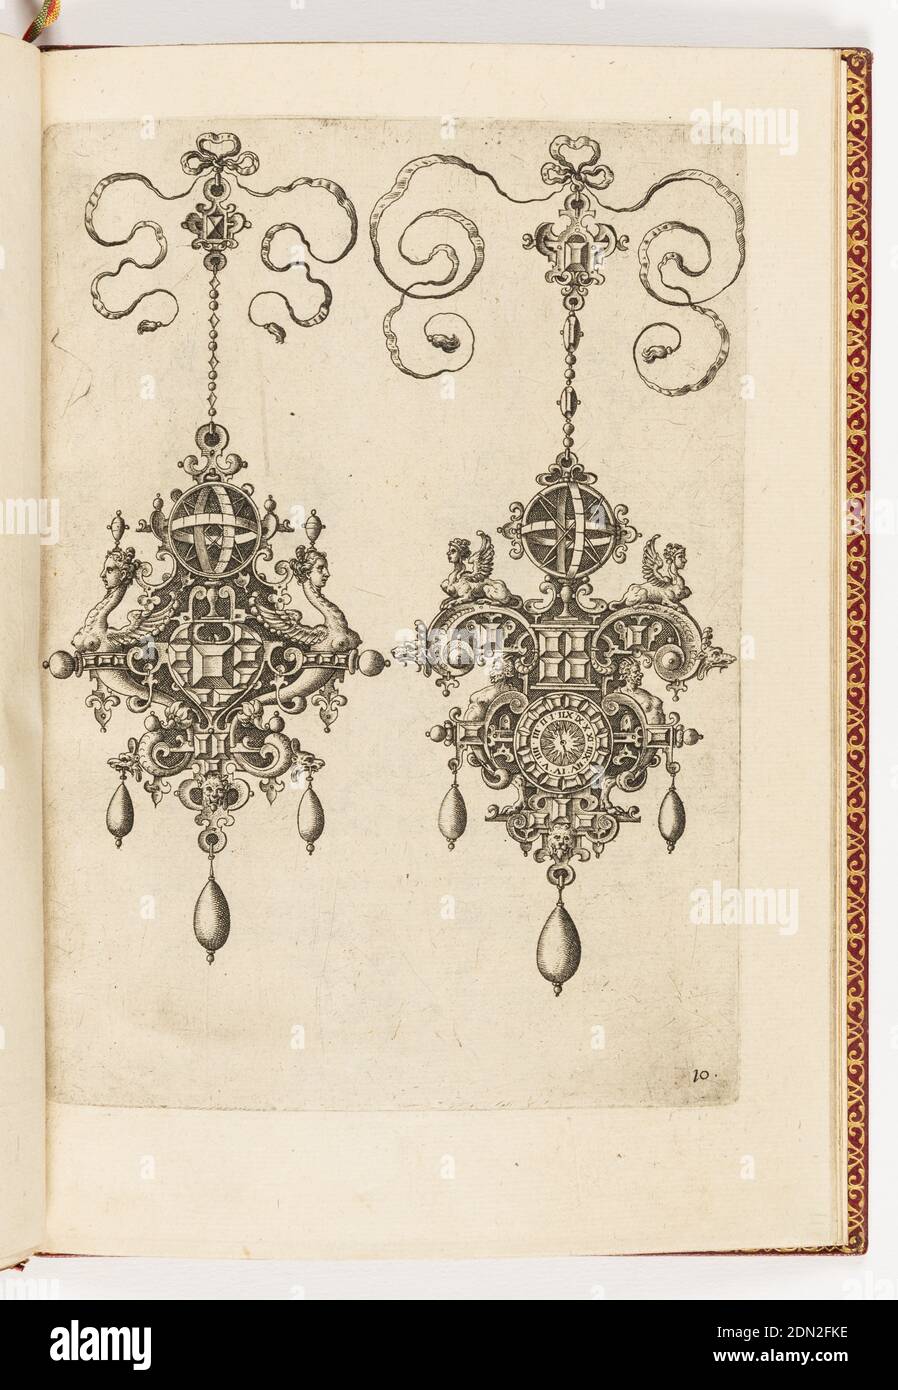 Plate 10, from Monilium Bullarum Inauriumque Artificiocissimae Icones, Ioannis Collaert Opus Postremum (Designs for Necklaces, Pendants and Earrings of the Highest Skill, the Final Work by Joannis Collaert), Hans Collaert the Elder, Flemish, ca. 1530 - 1581, Philips Galle, Flemish, 1537 - 1612, Engraving on paper, laid and gilded, Two designs for pendant suspended from ribbons with a bow knots. Strapwork forms the pendant cartouches. Each has three drop pearls, and an astrolabe flanked by griffins. The design at right includes a clock., Antwerp, Belgium, 1581, ornament, Print Stock Photo